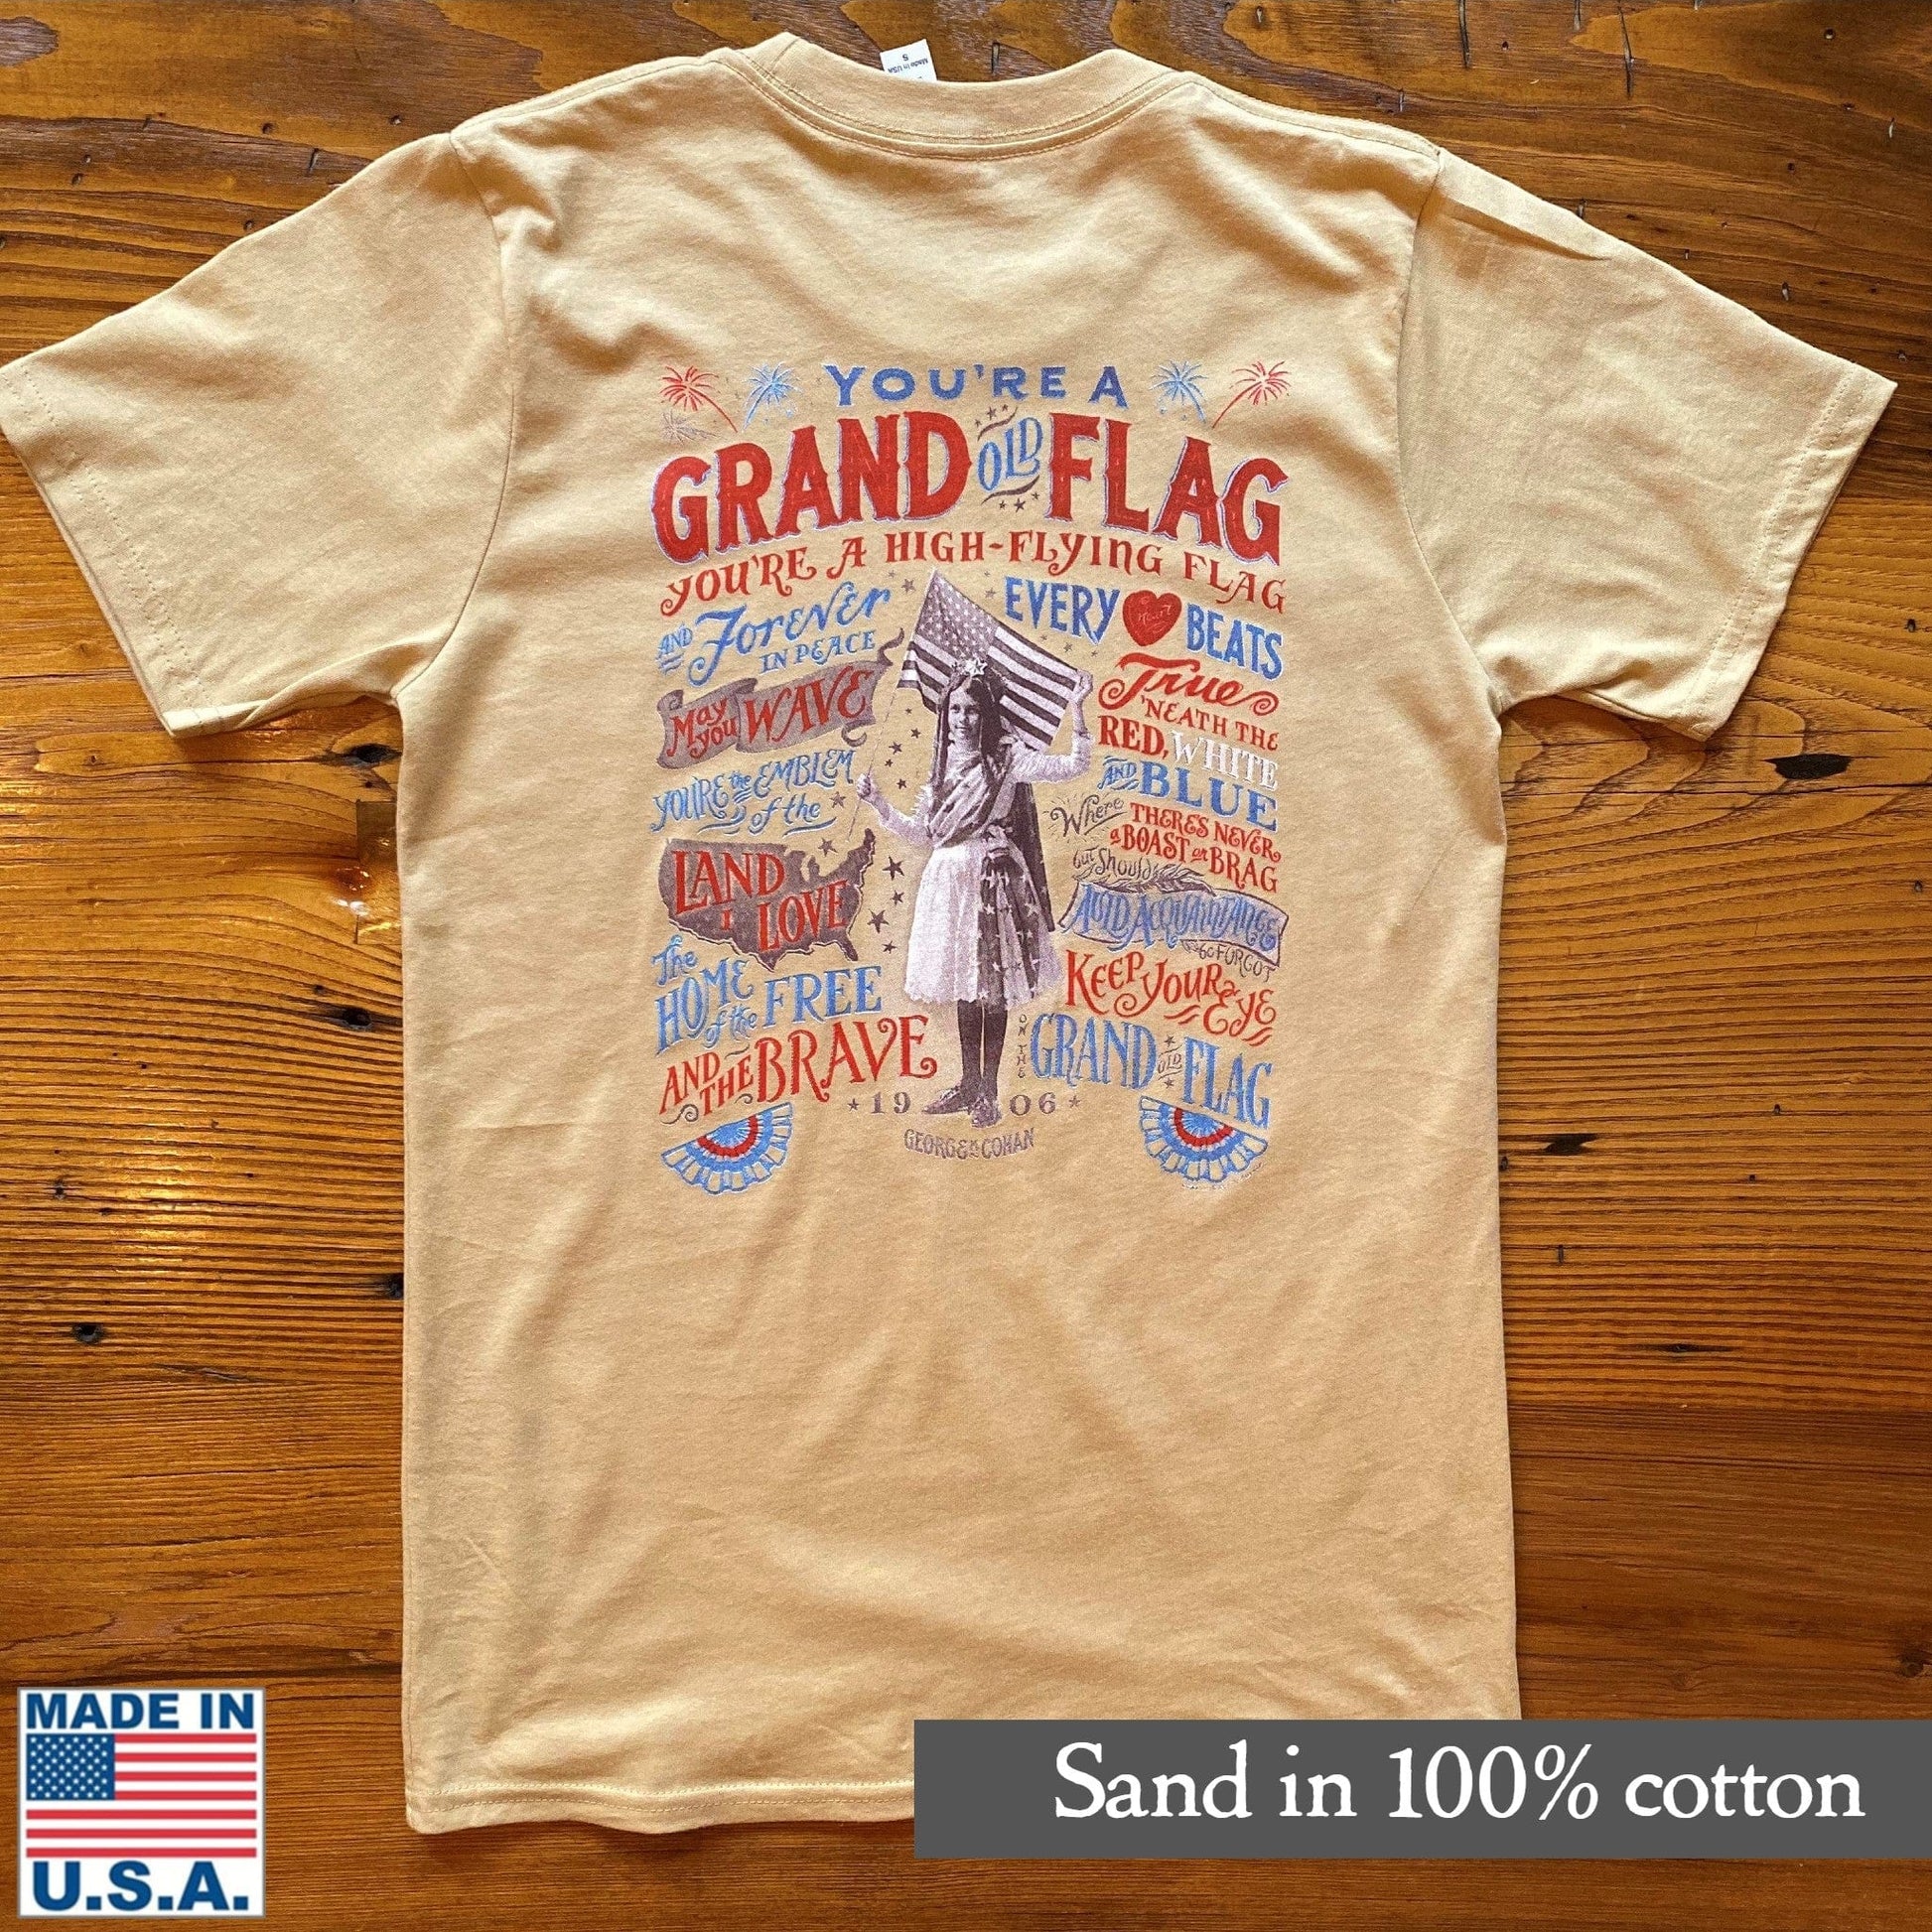 "Grand Old Flag" Shirt Sand color Back design 100% Cotton from the history list store 